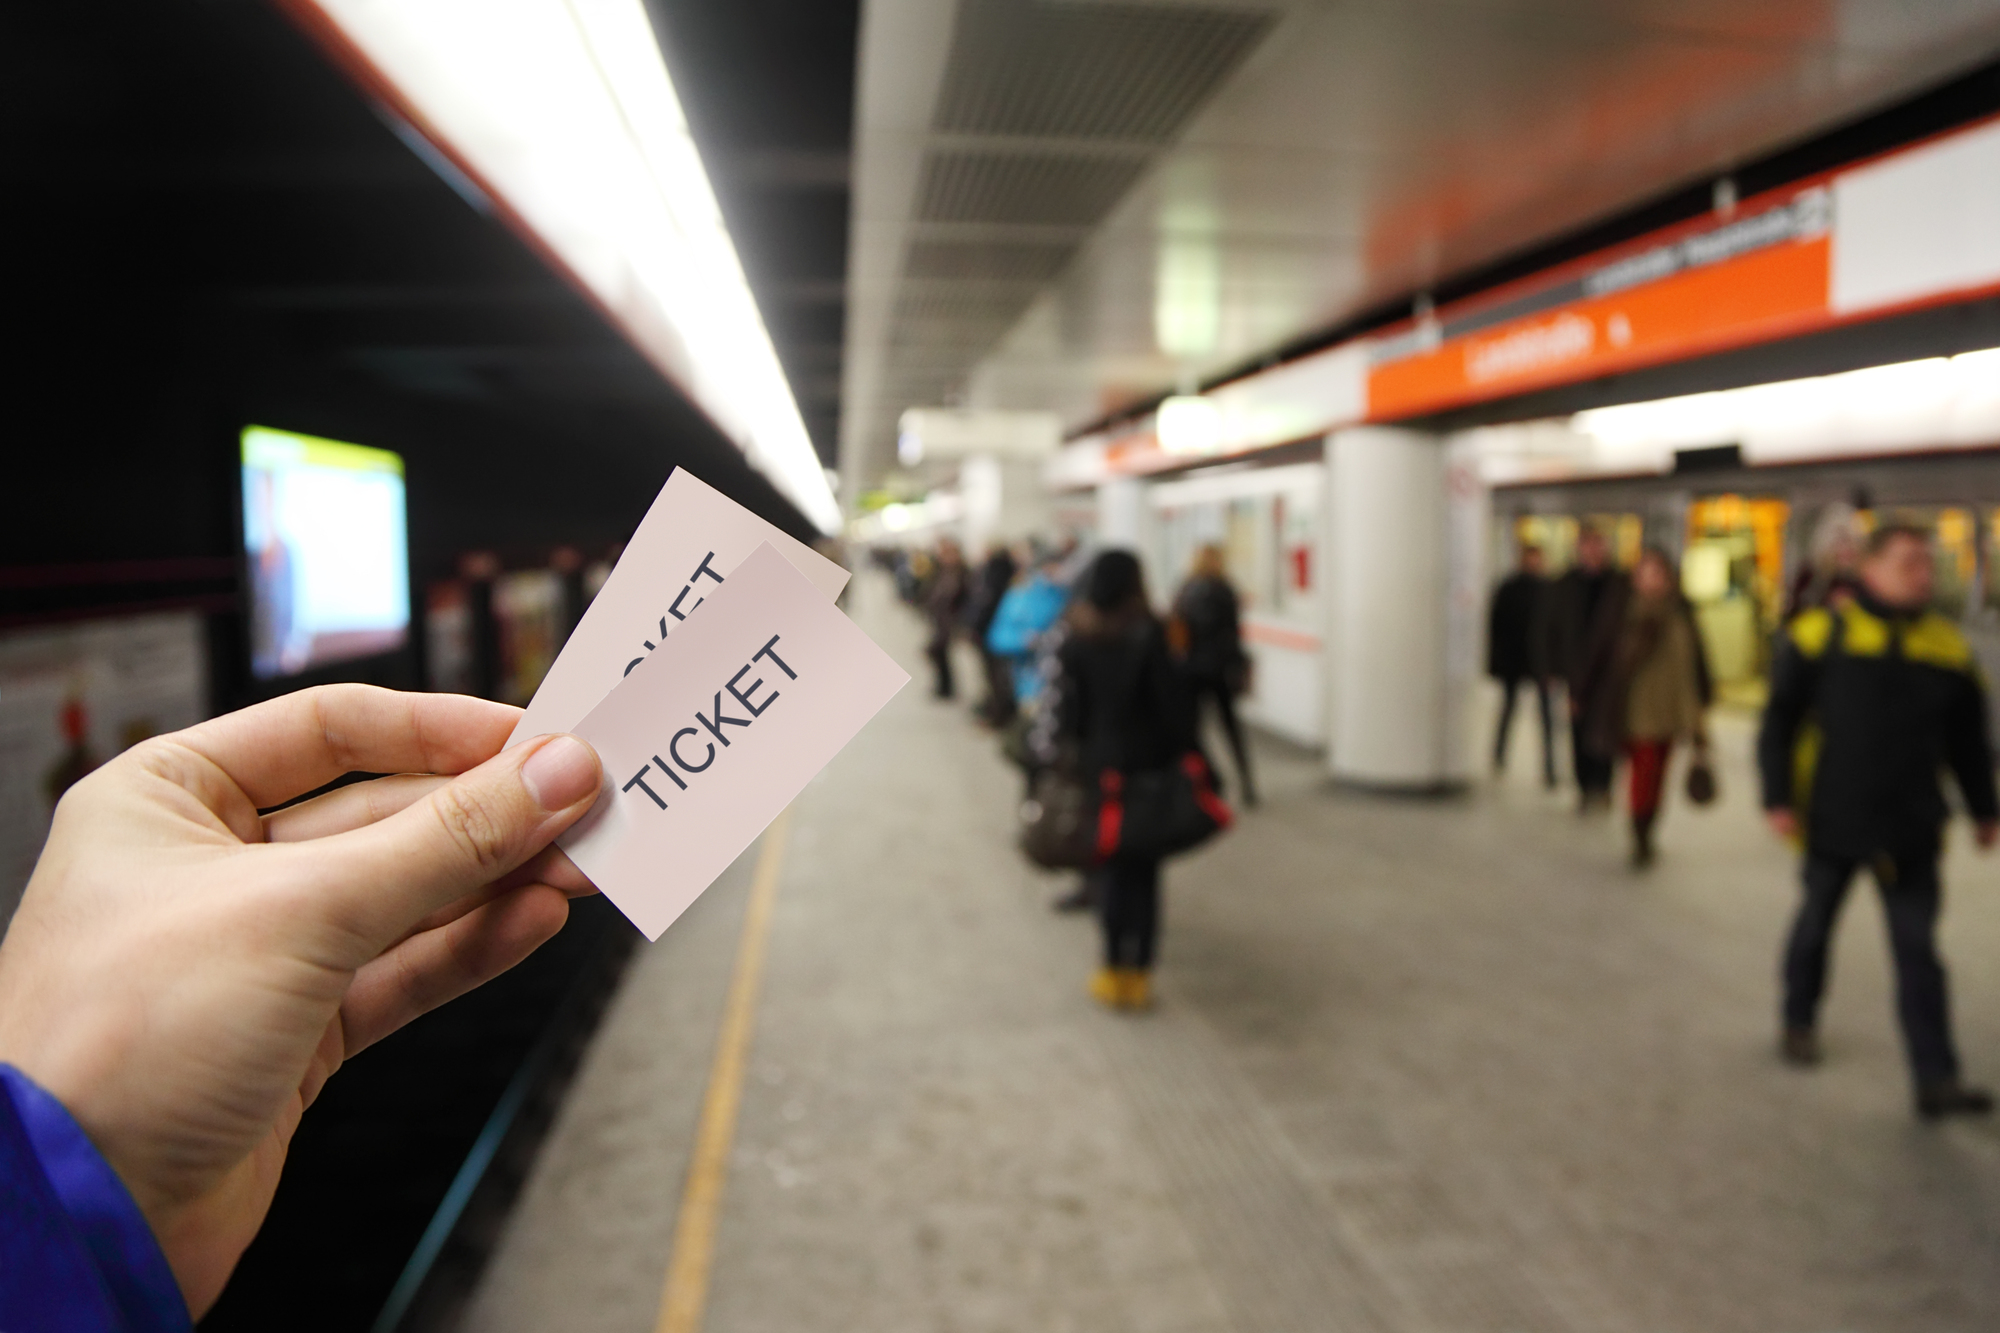 Male hand holds two tickets in subway. People wait for train on platform.